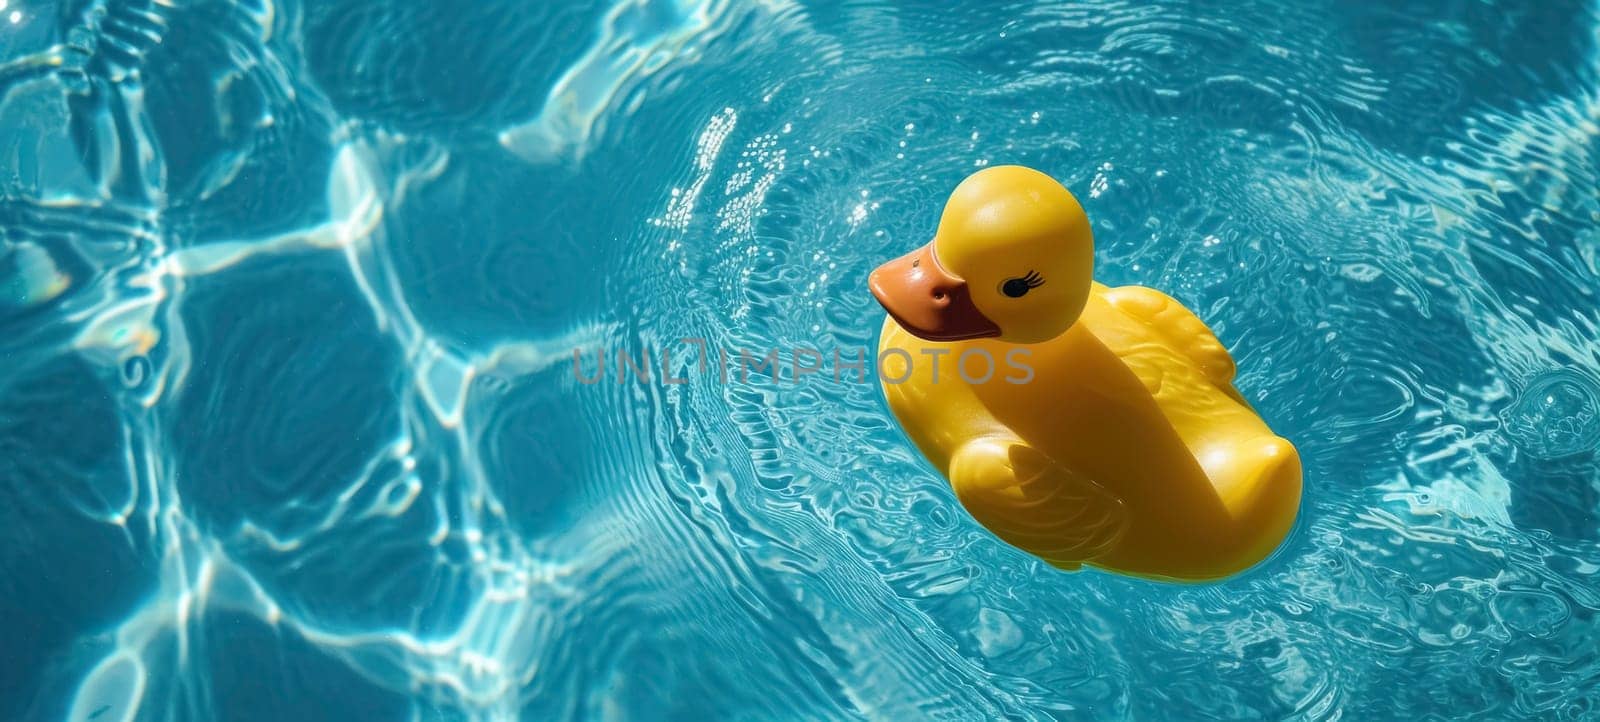 Close-up of a yellow rubber duck covered in water droplets, floating on the vibrant blue water surface.